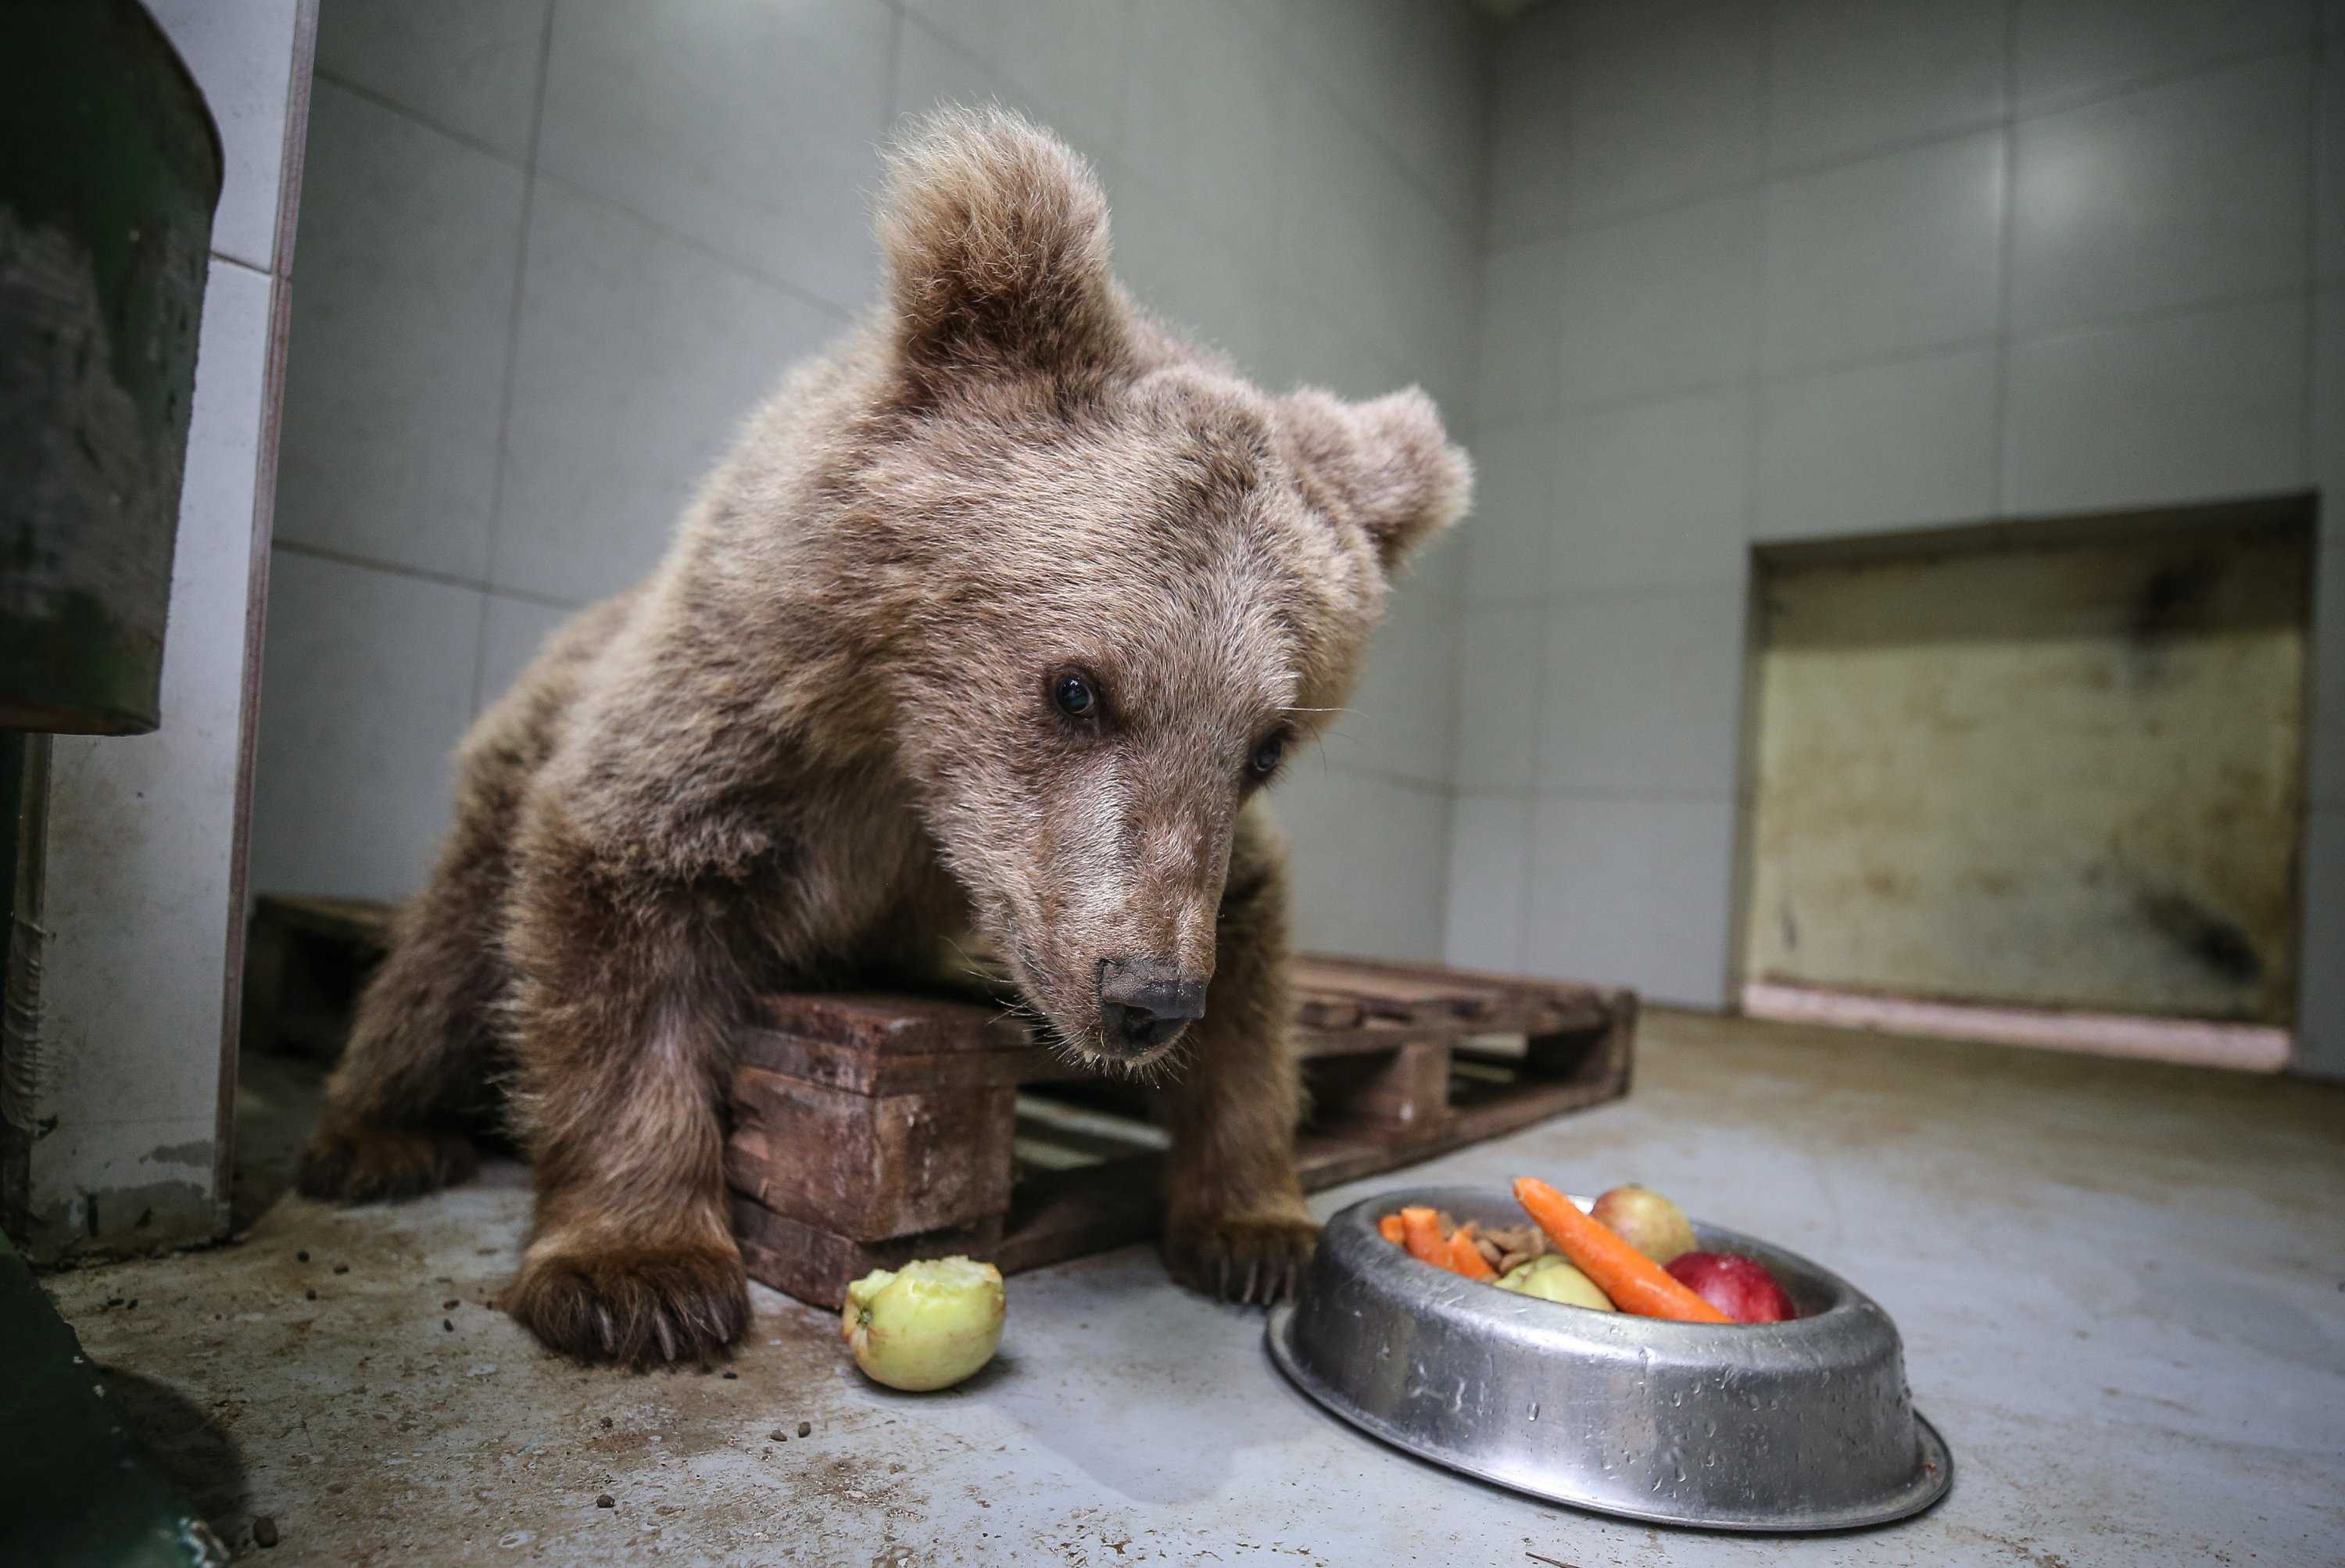 Grizzly Bear - Wildlife Images Rehabilitation and Education Center